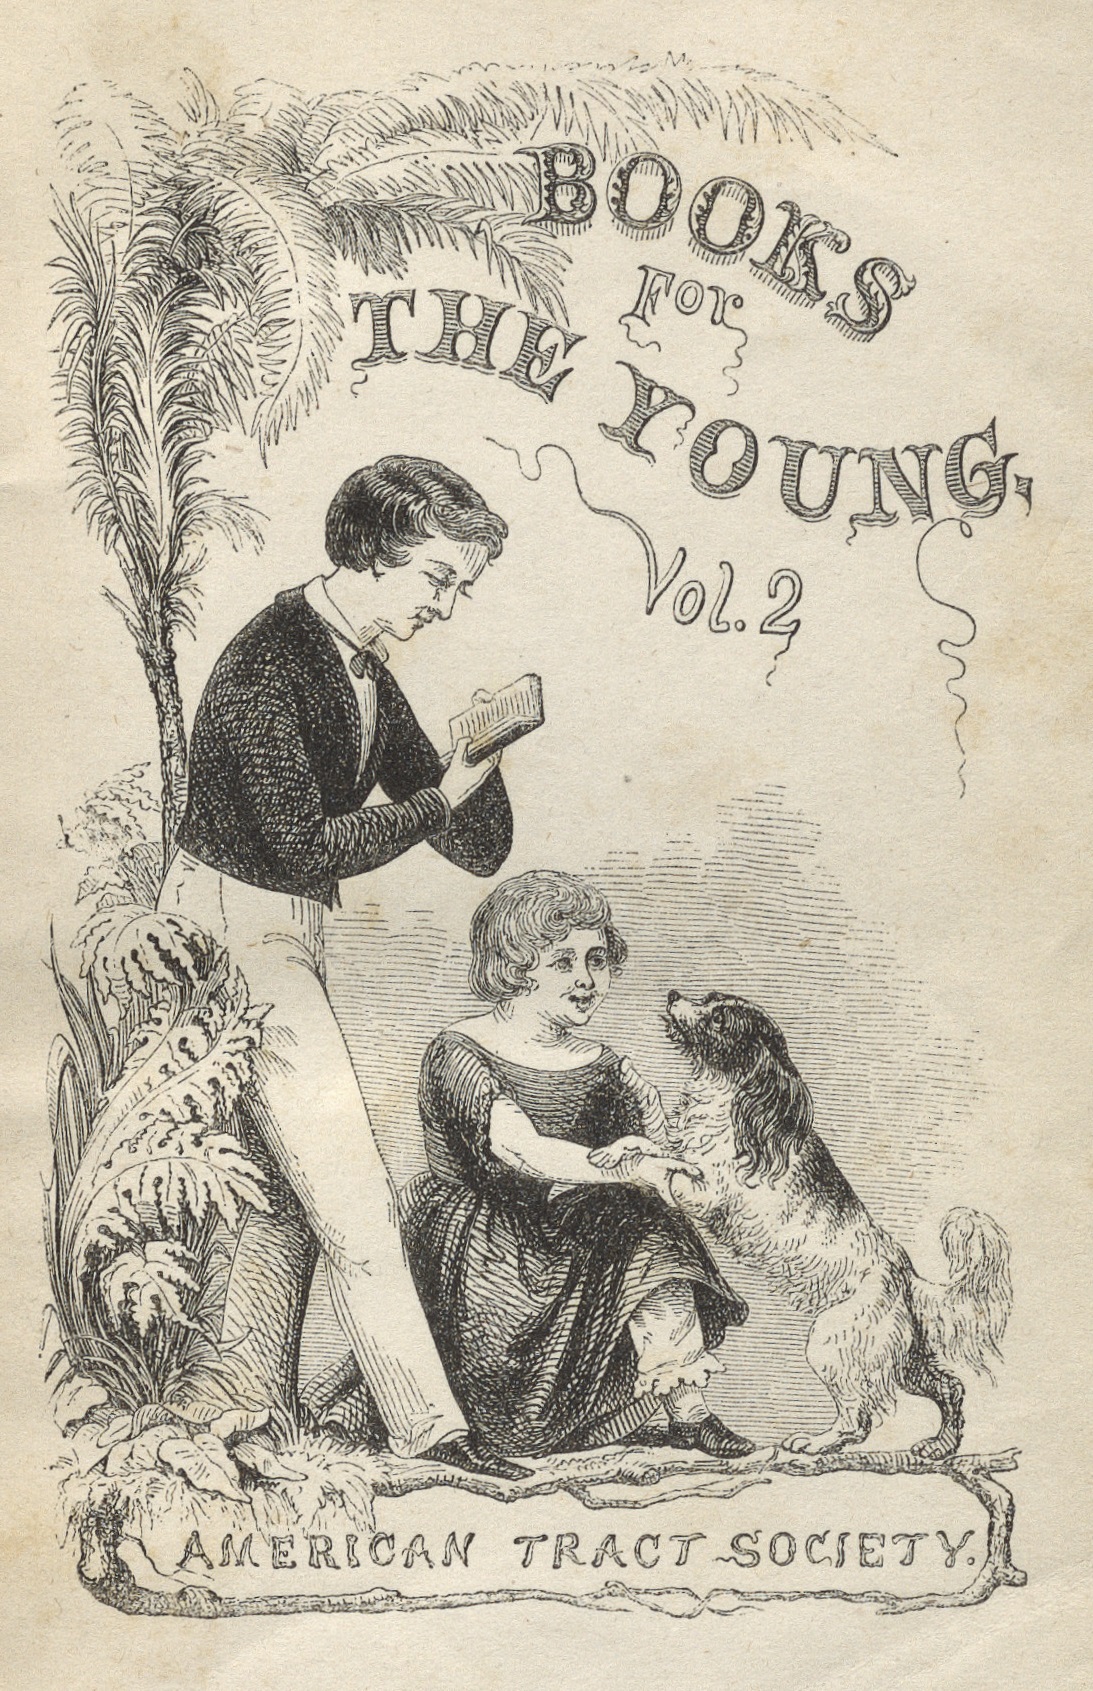 Books For The Young, Volume 2, 1851. Content compilation © 2020, by the American Antiquarian Society. All rights reserved.